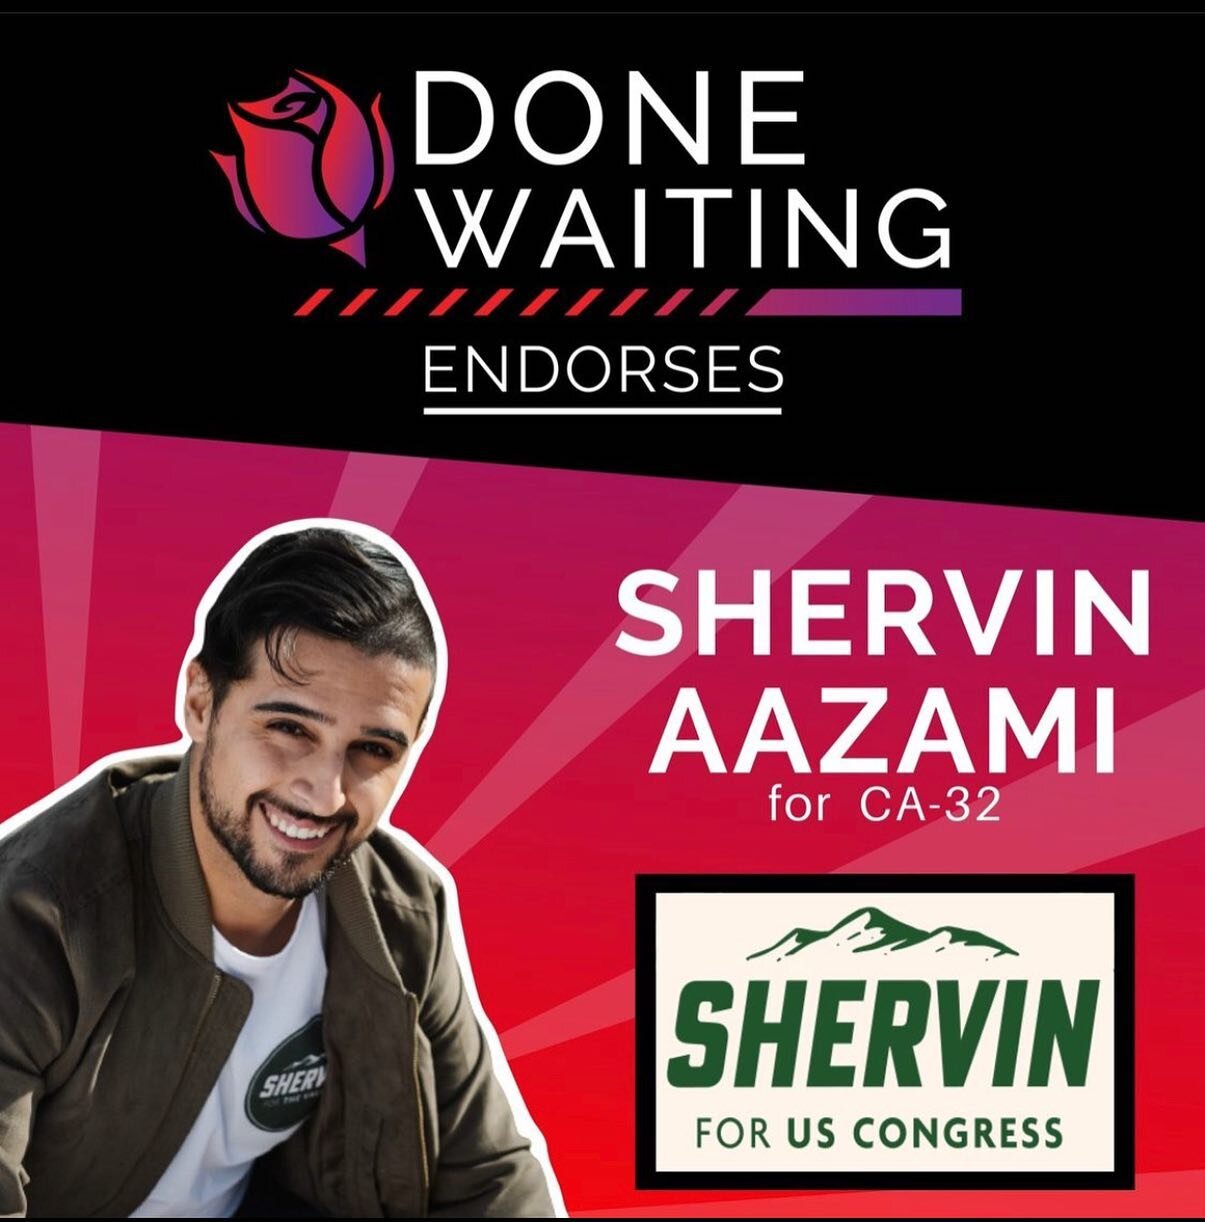 So honored to earn the endorsement of @_donewaiting_ for our race in CA32! Let&rsquo;s do this y&rsquo;all! 

#progressive #sanfernandovalley #ca32